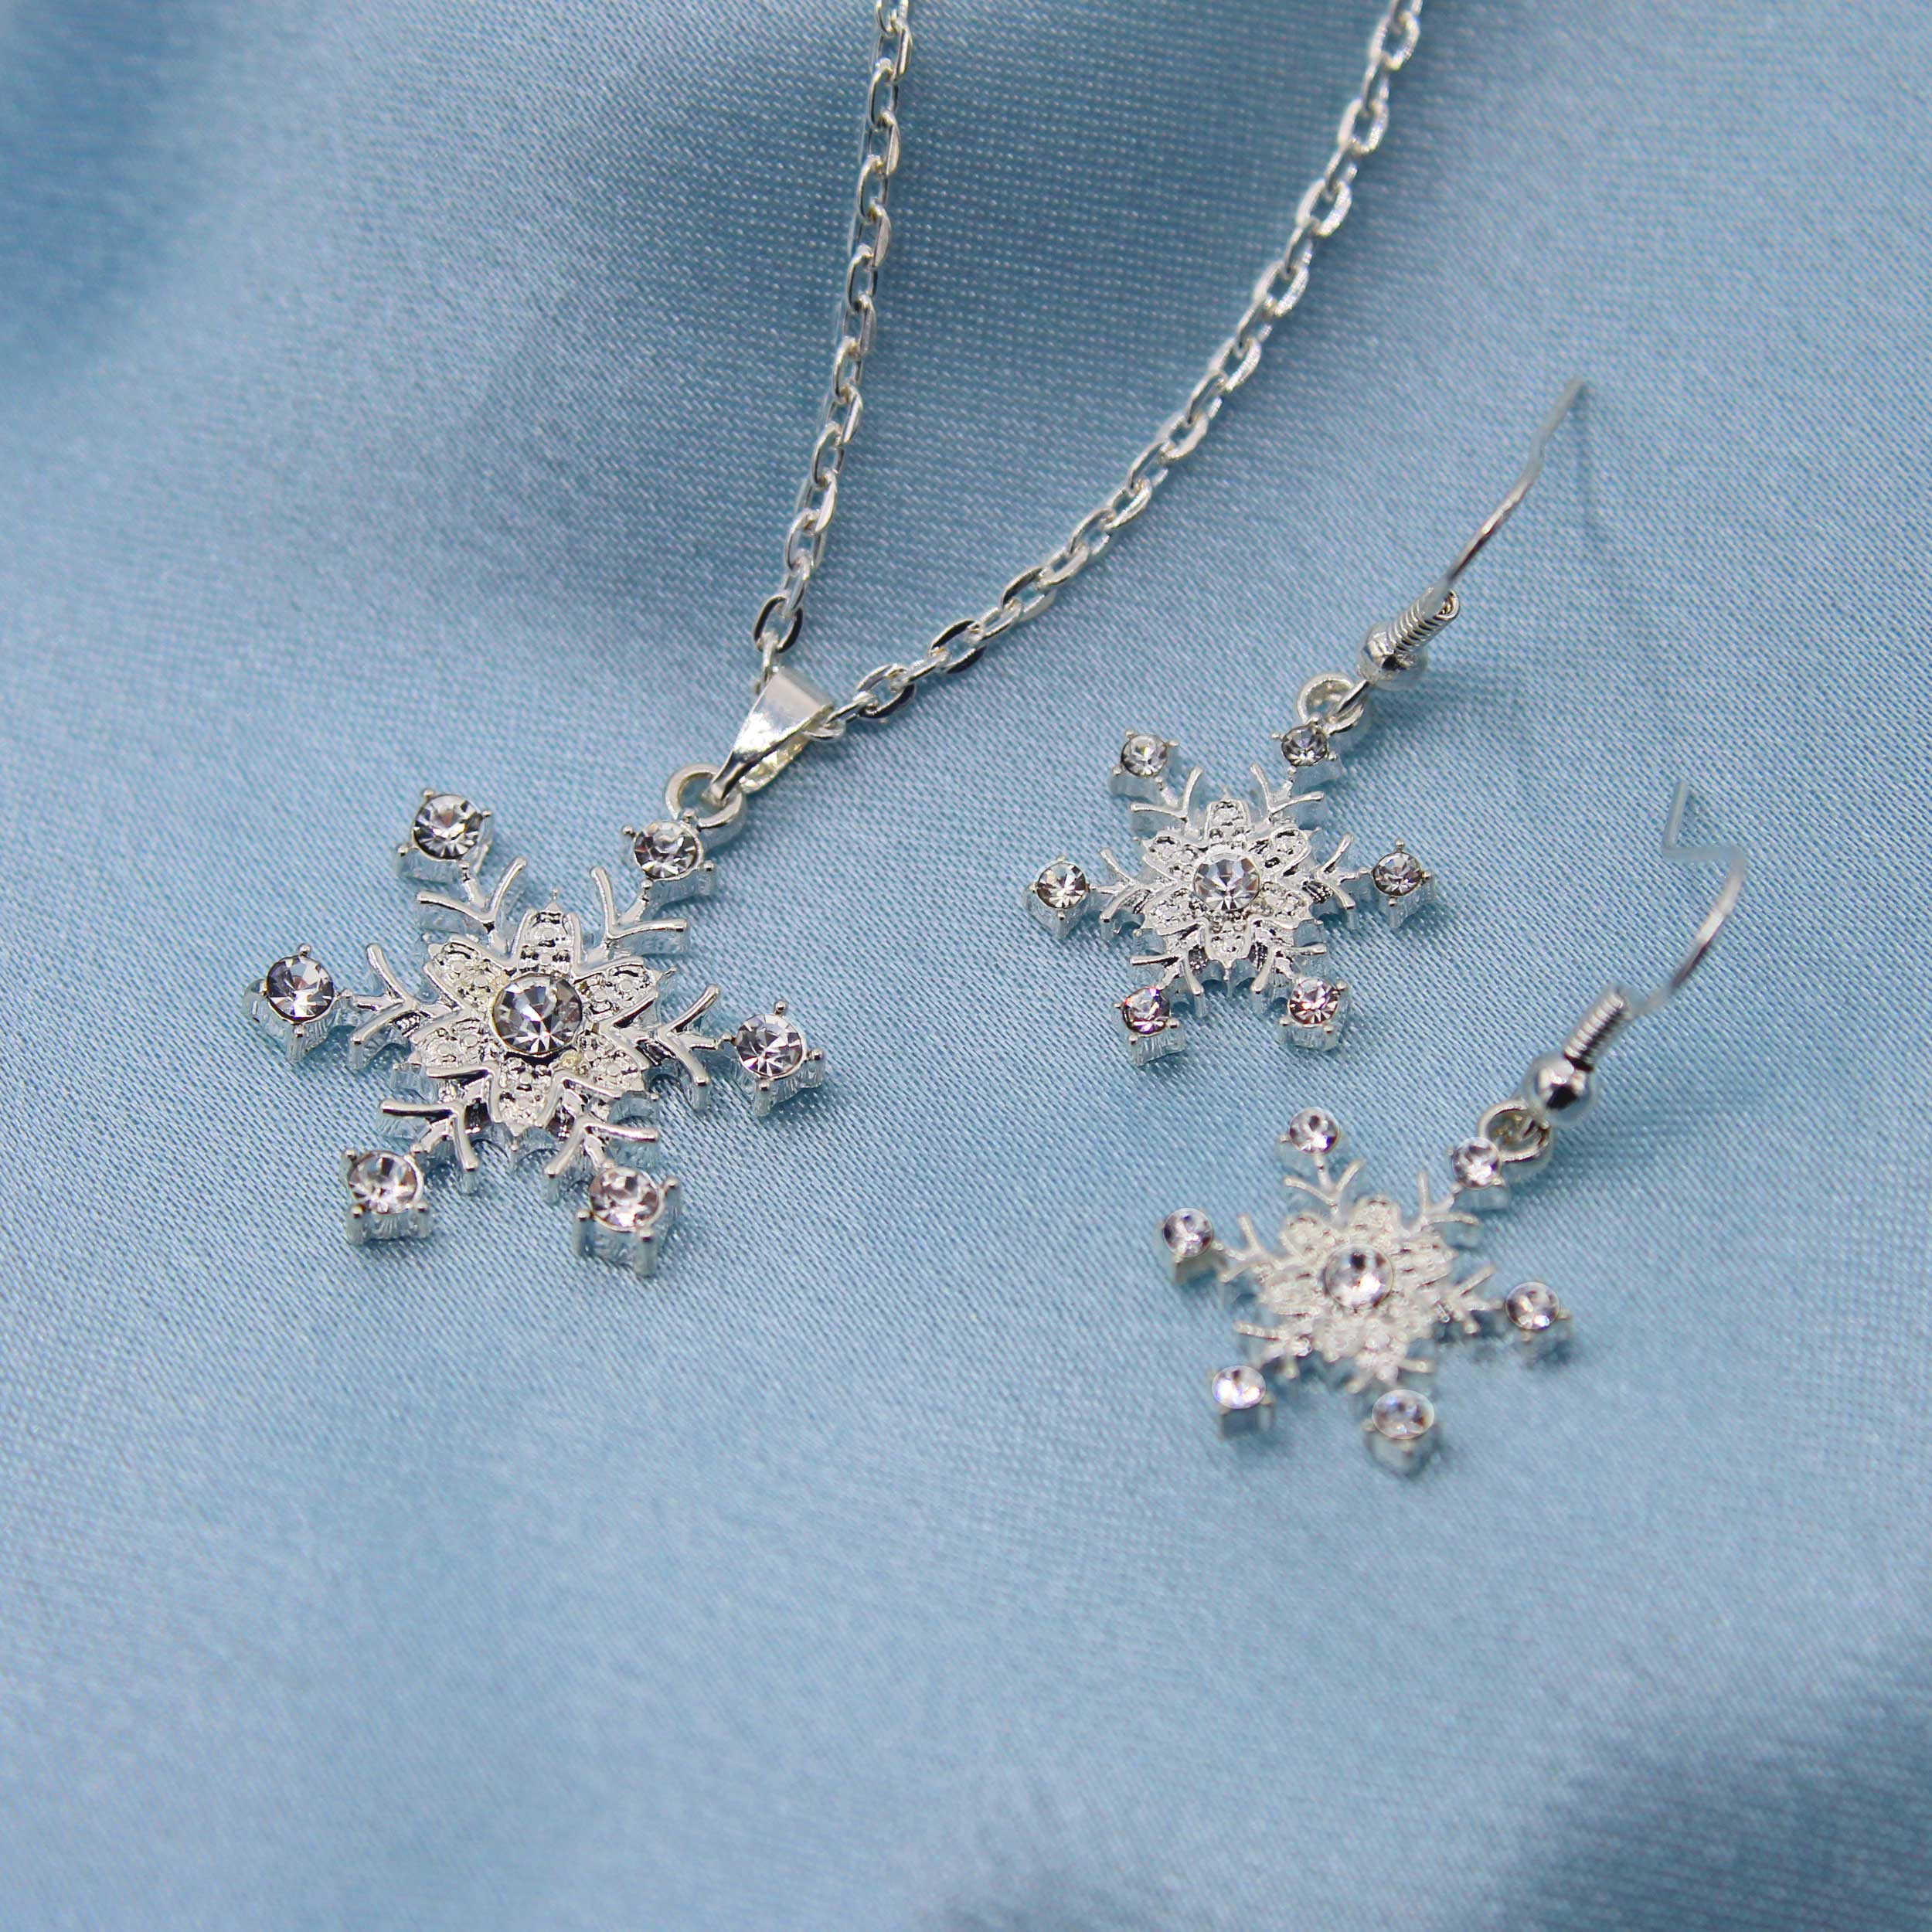 Snowflake Charm in Sterling Silver and Enamel